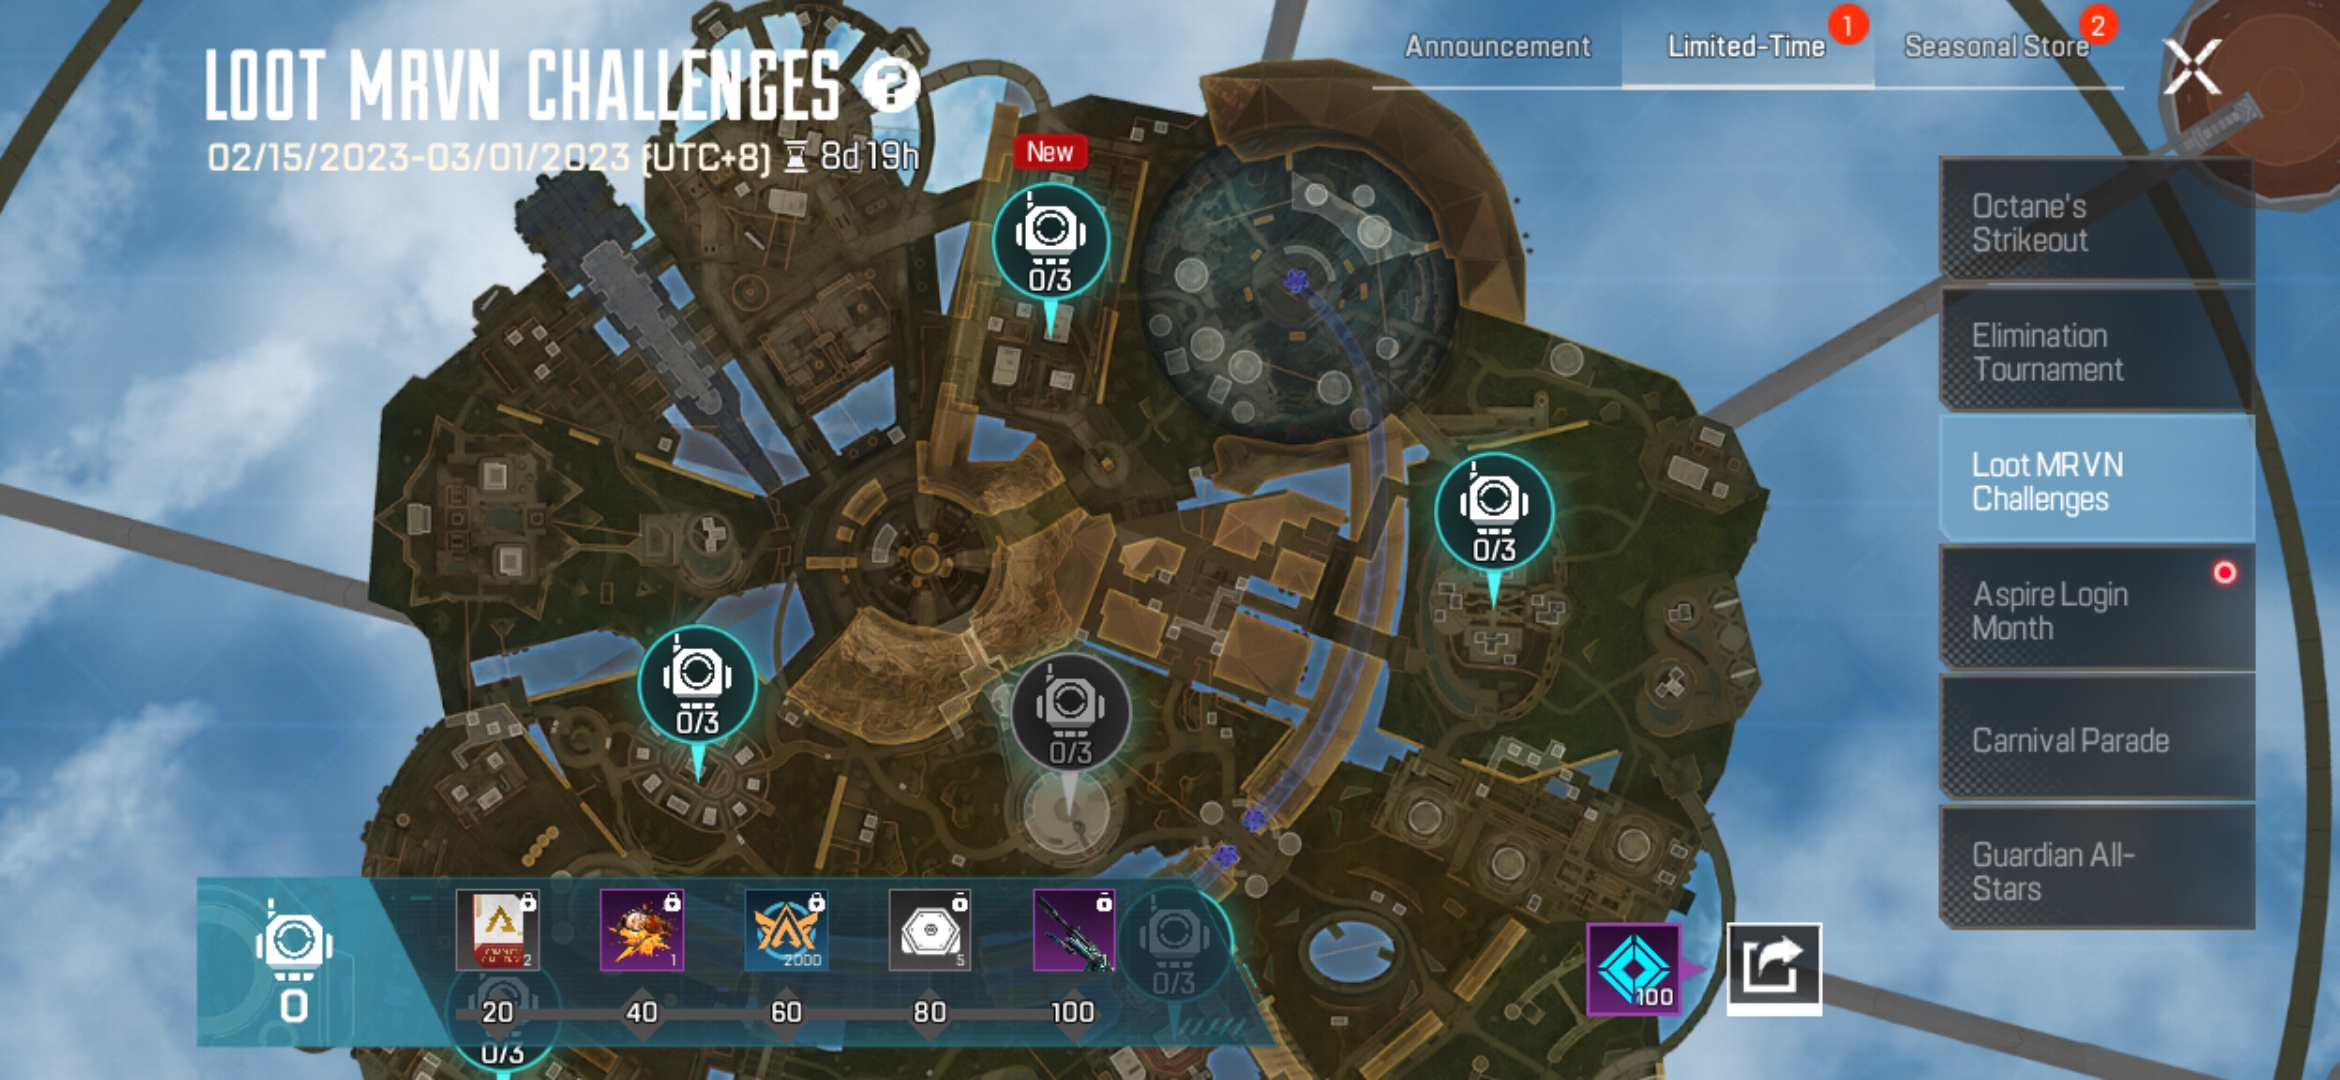 featured image apex legends mobile loot mrvn challenges event guide